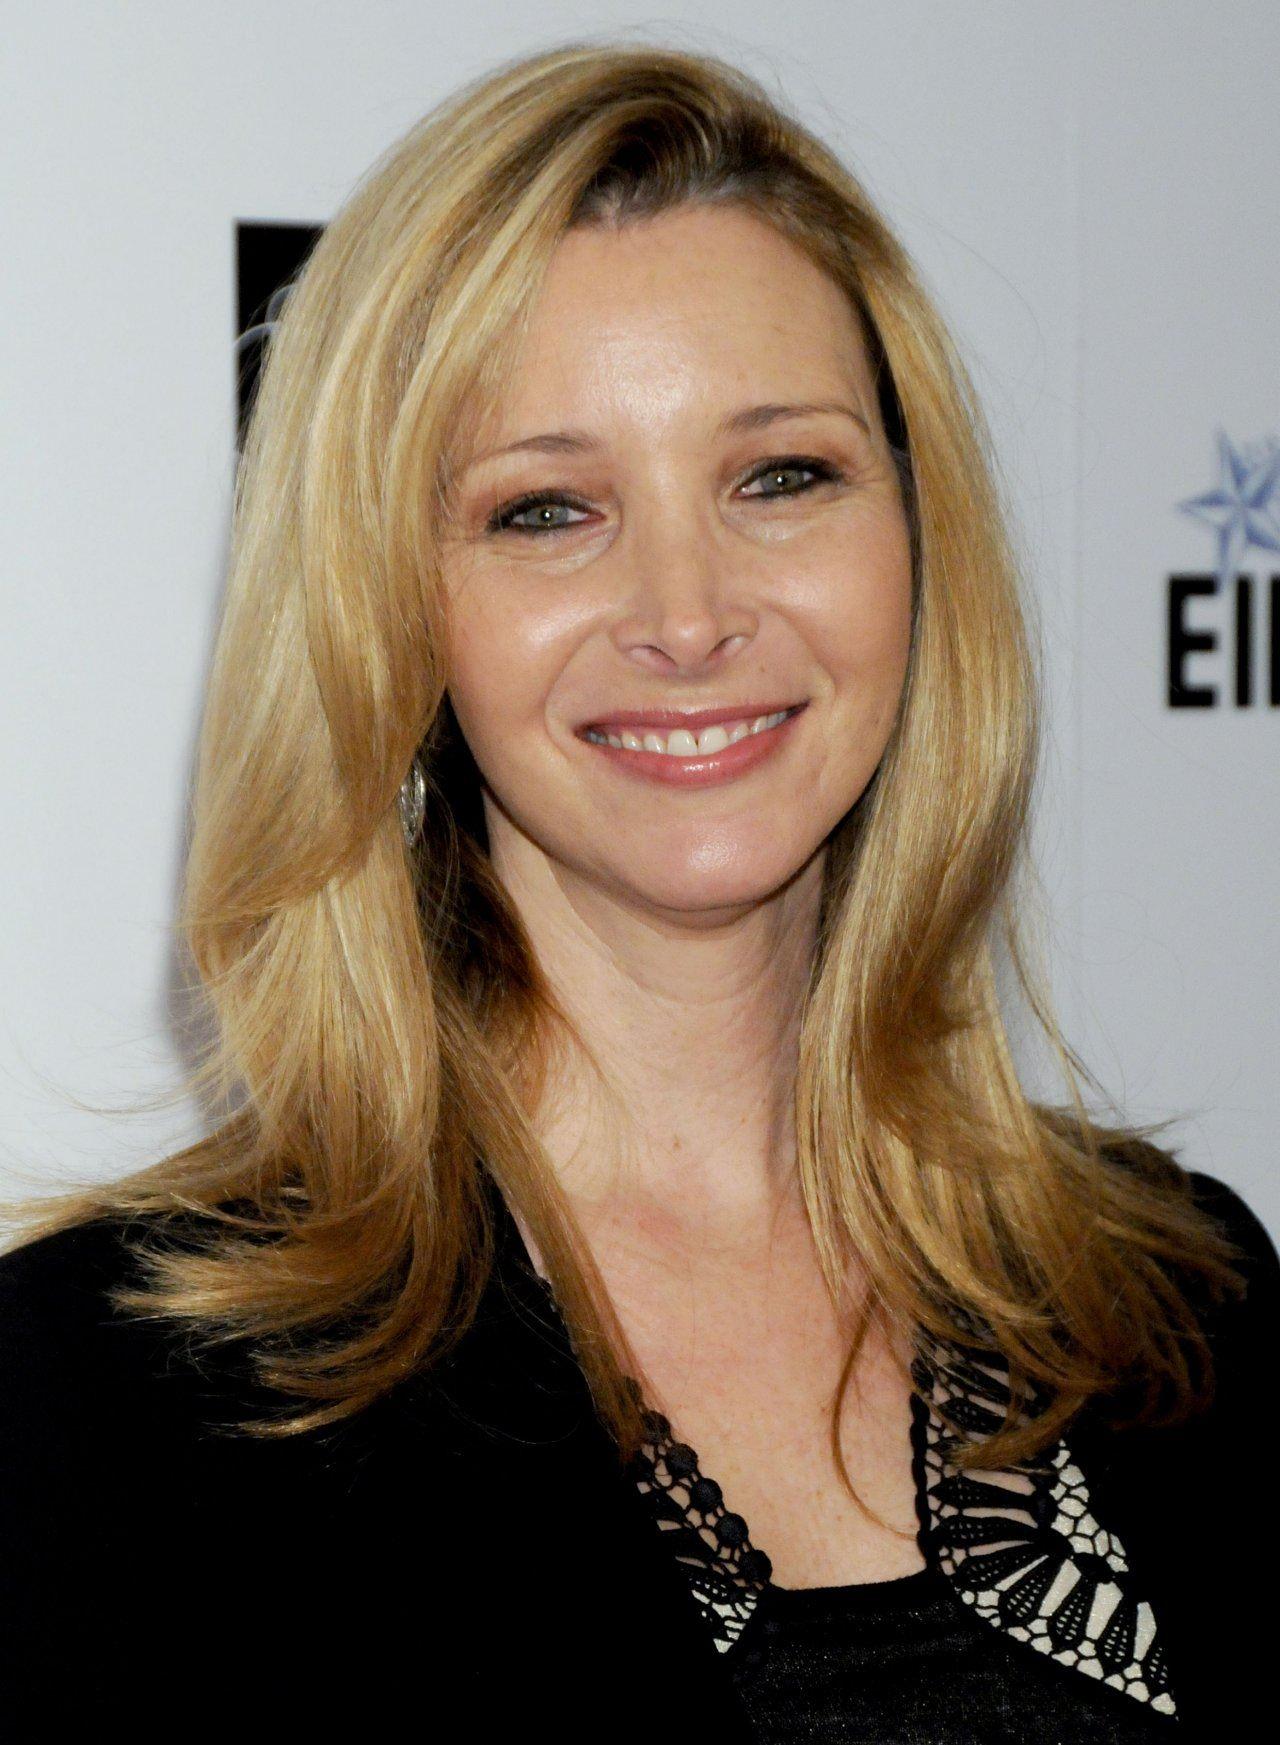 arte wallpaper: Lisa Kudrow picture and Wallpaper